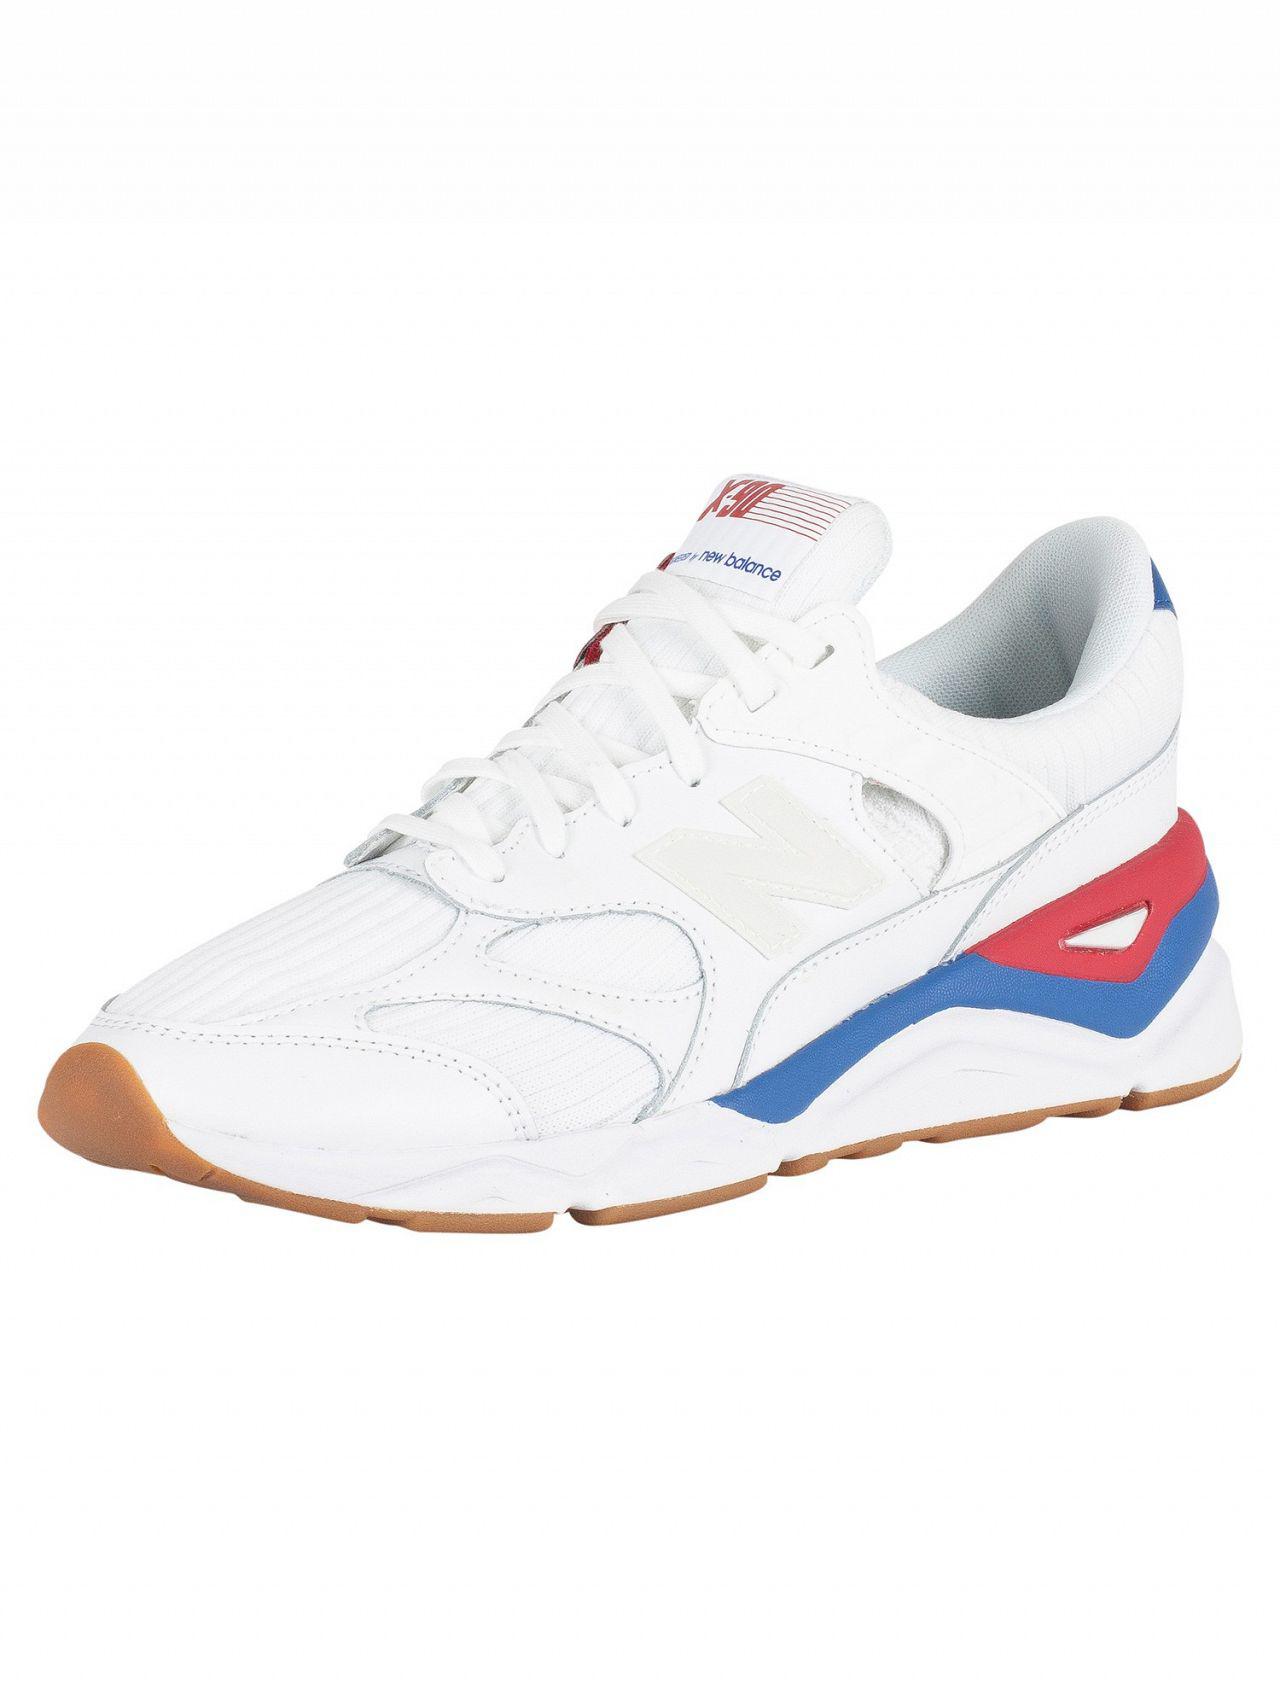 New Balance Suede White/blue/red X-90 Trainers for Men | Lyst